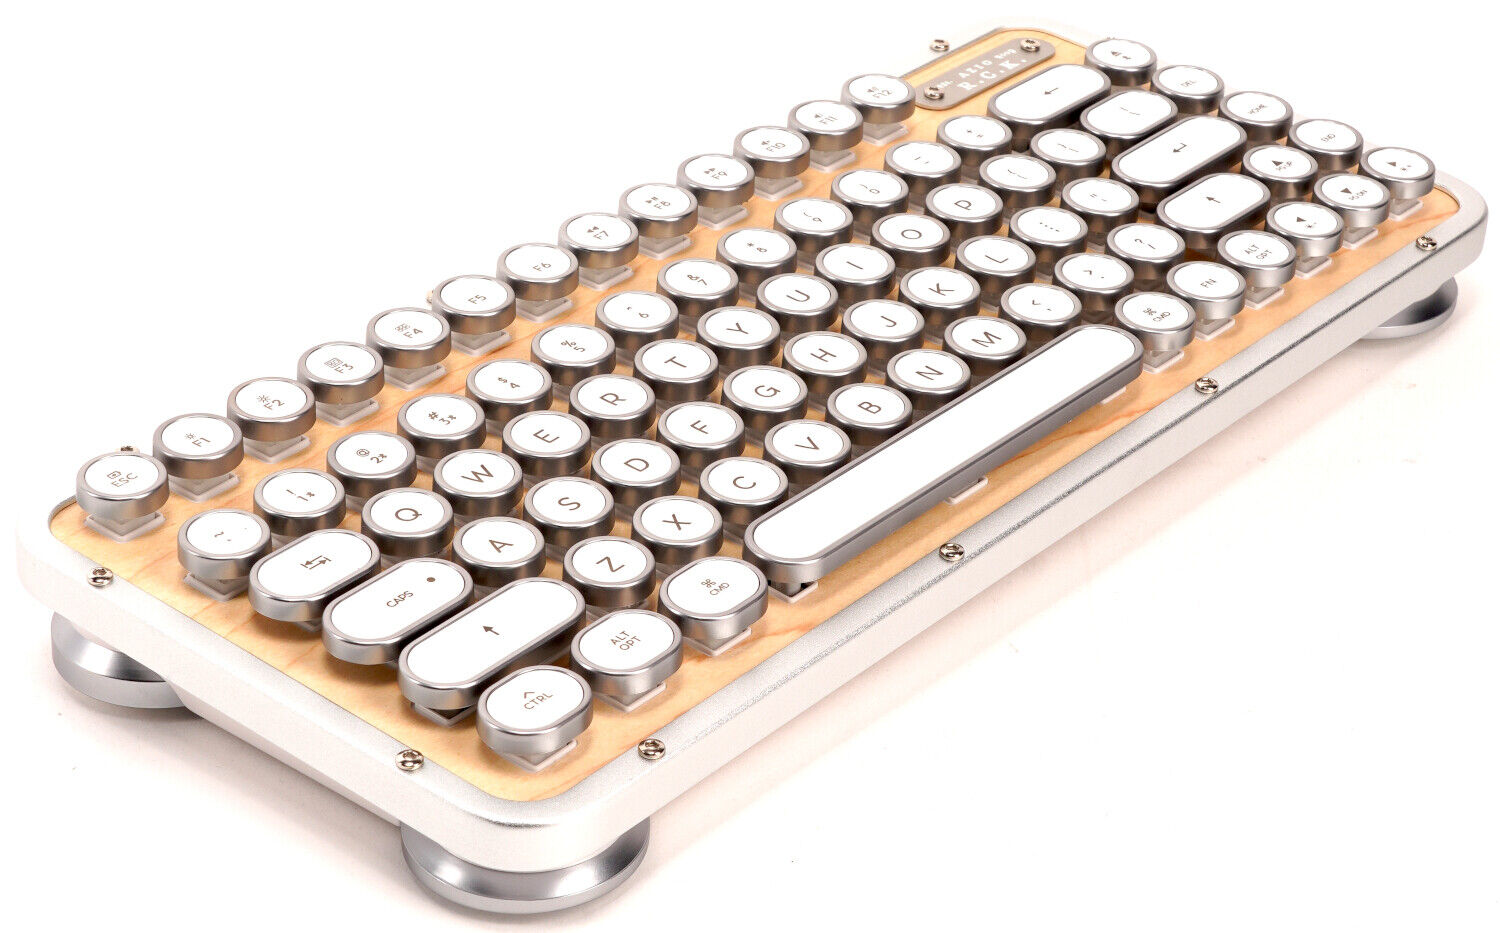 Azio Retro Compact Mechanical Keyboard with Arm Rest Maple